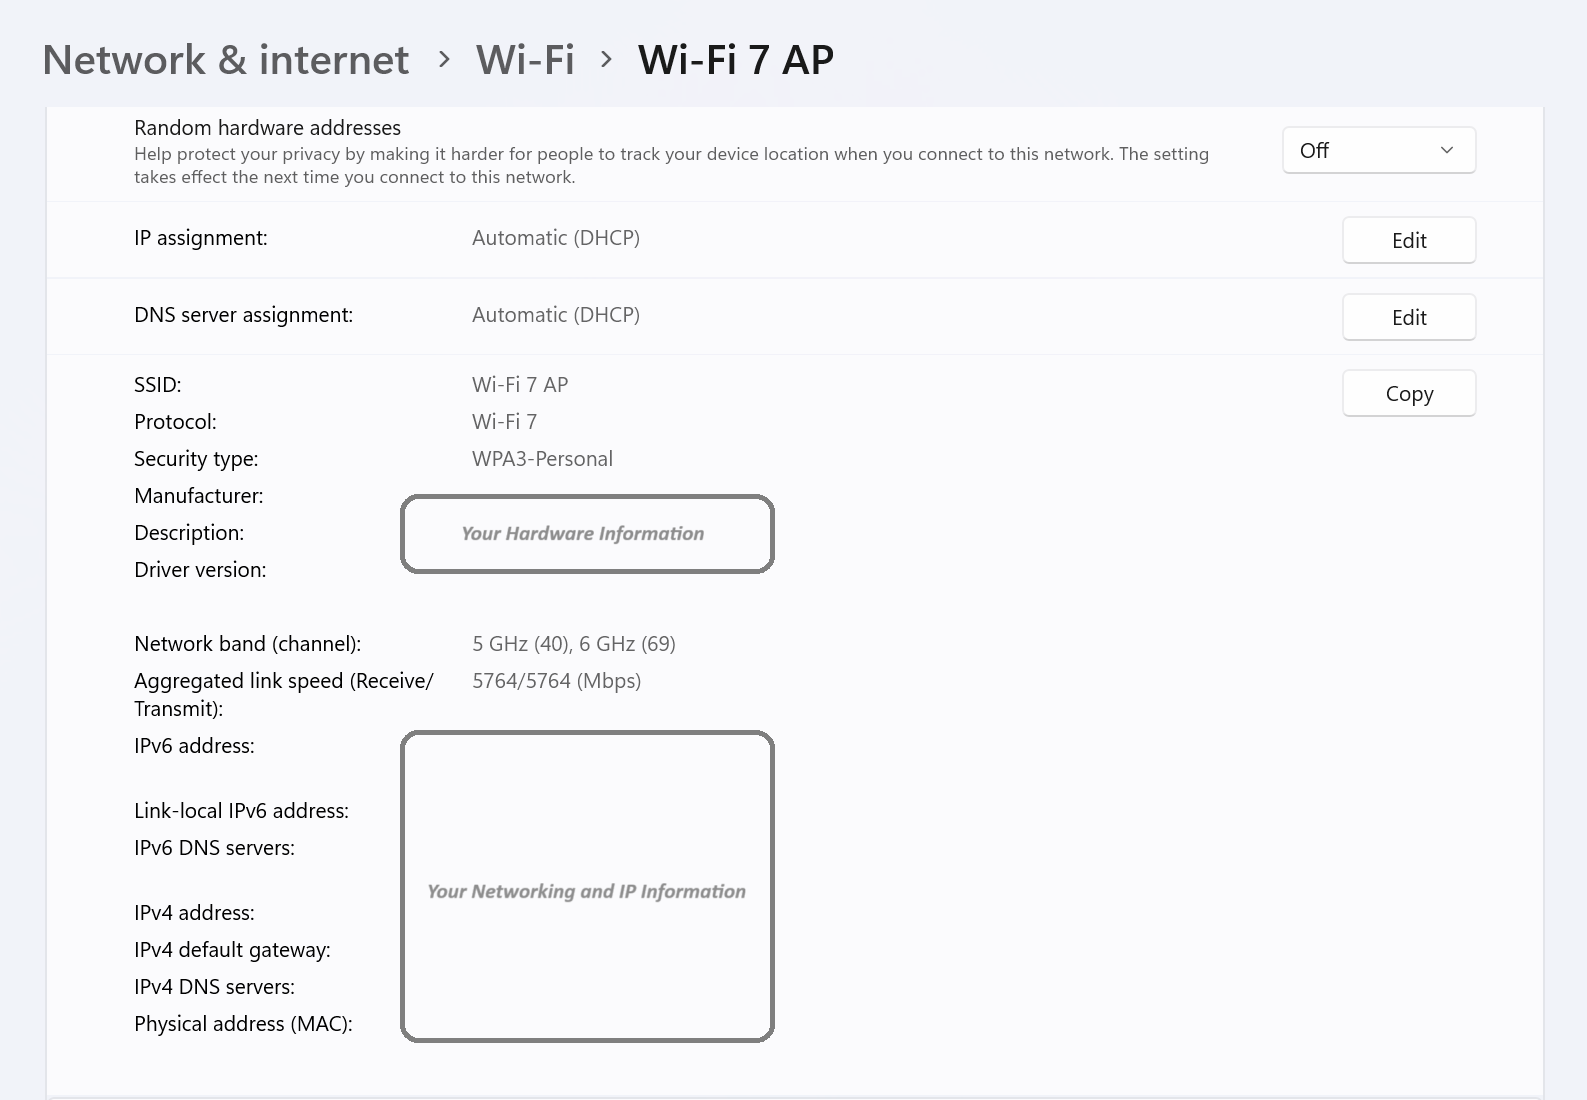 Wi-Fi settings showing a Windows PC connected to the Wi-Fi 7 access point